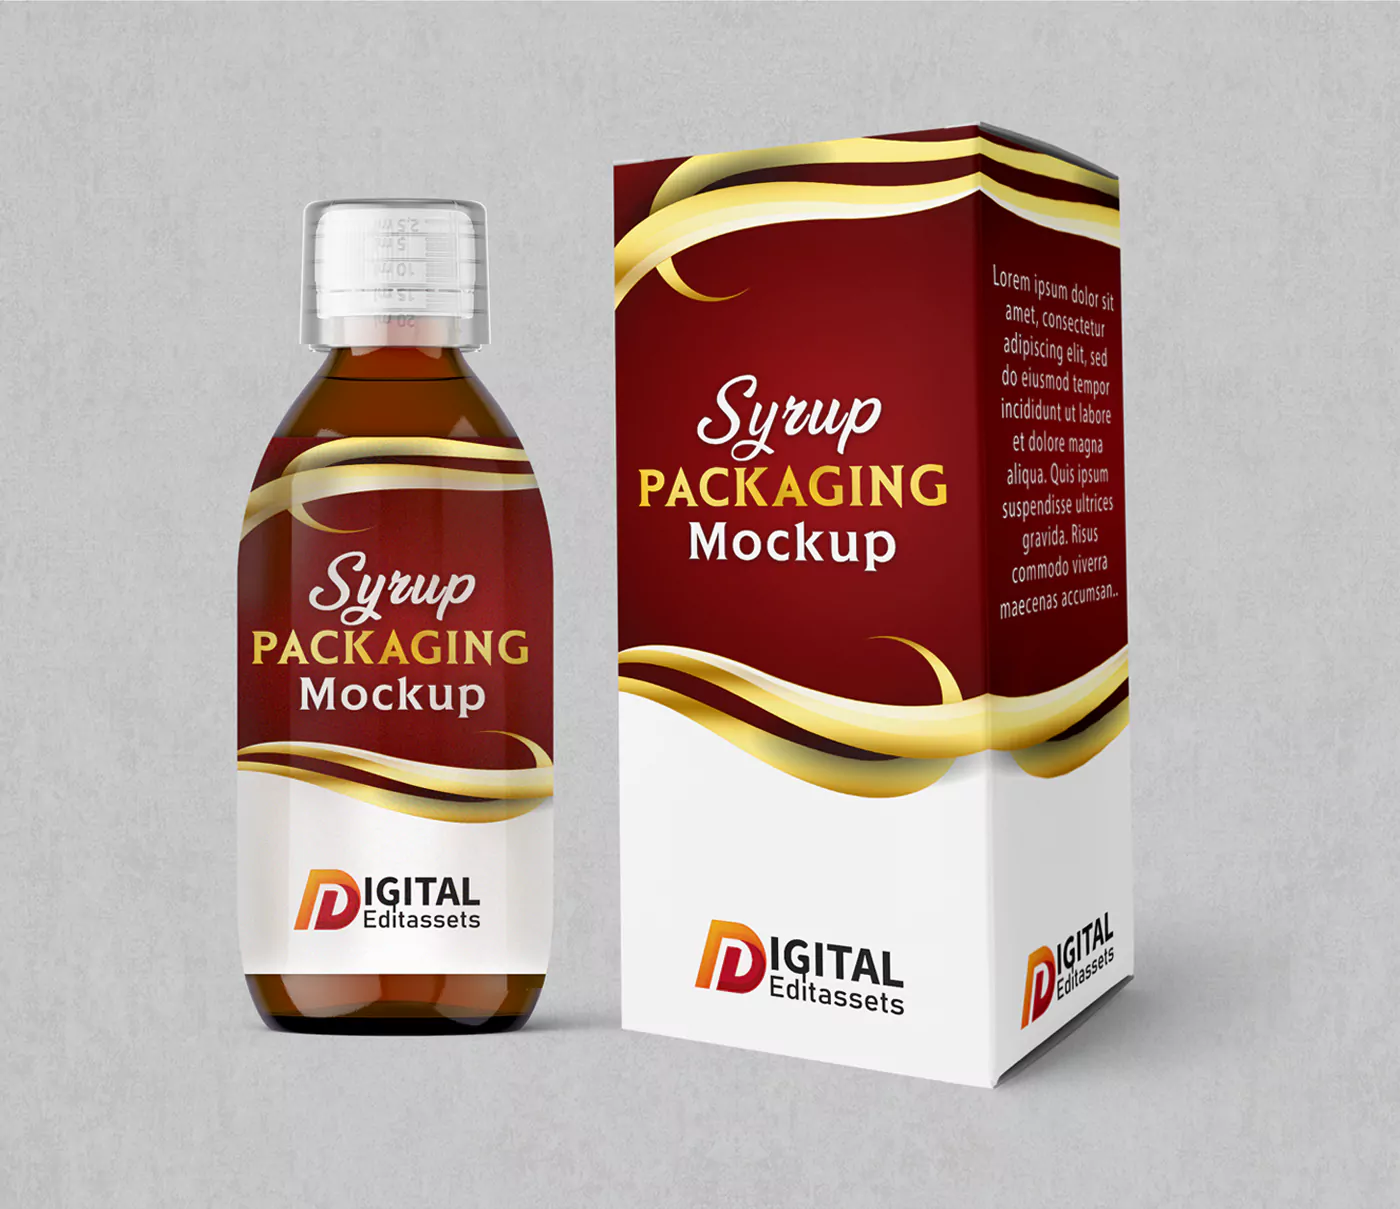 cough-syrup-packaging-mockup-free-for-trendsetters